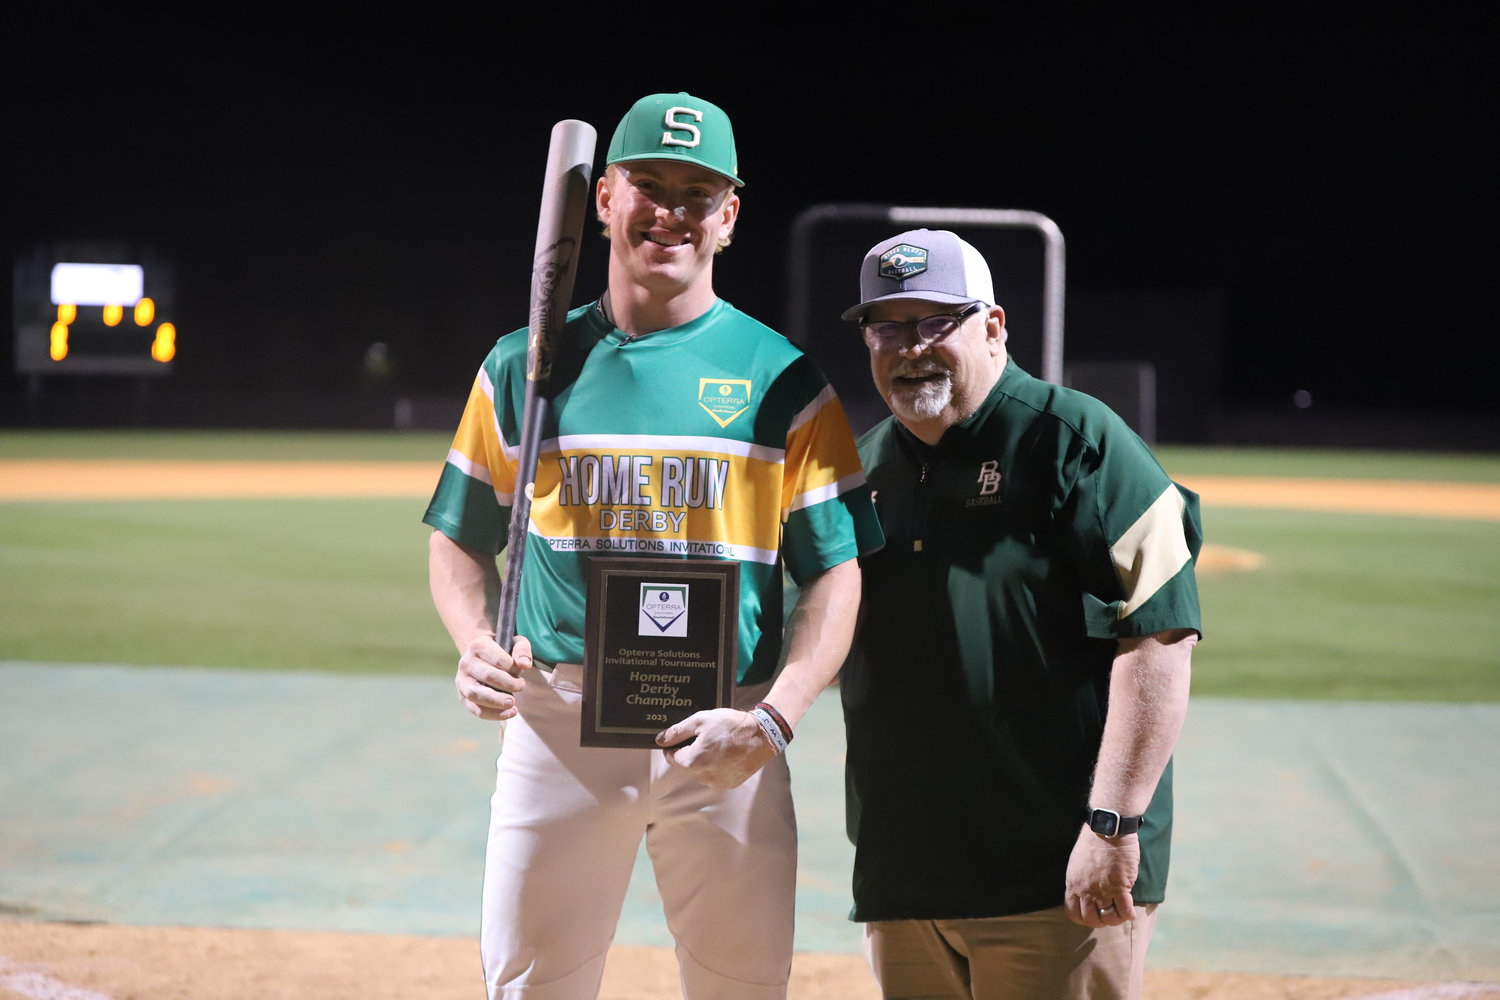 Summerville's P.J. Morlando receives the Home Run Derby winning plaque from Opterra Solutions Invitational co-founder Jeff Parsons.